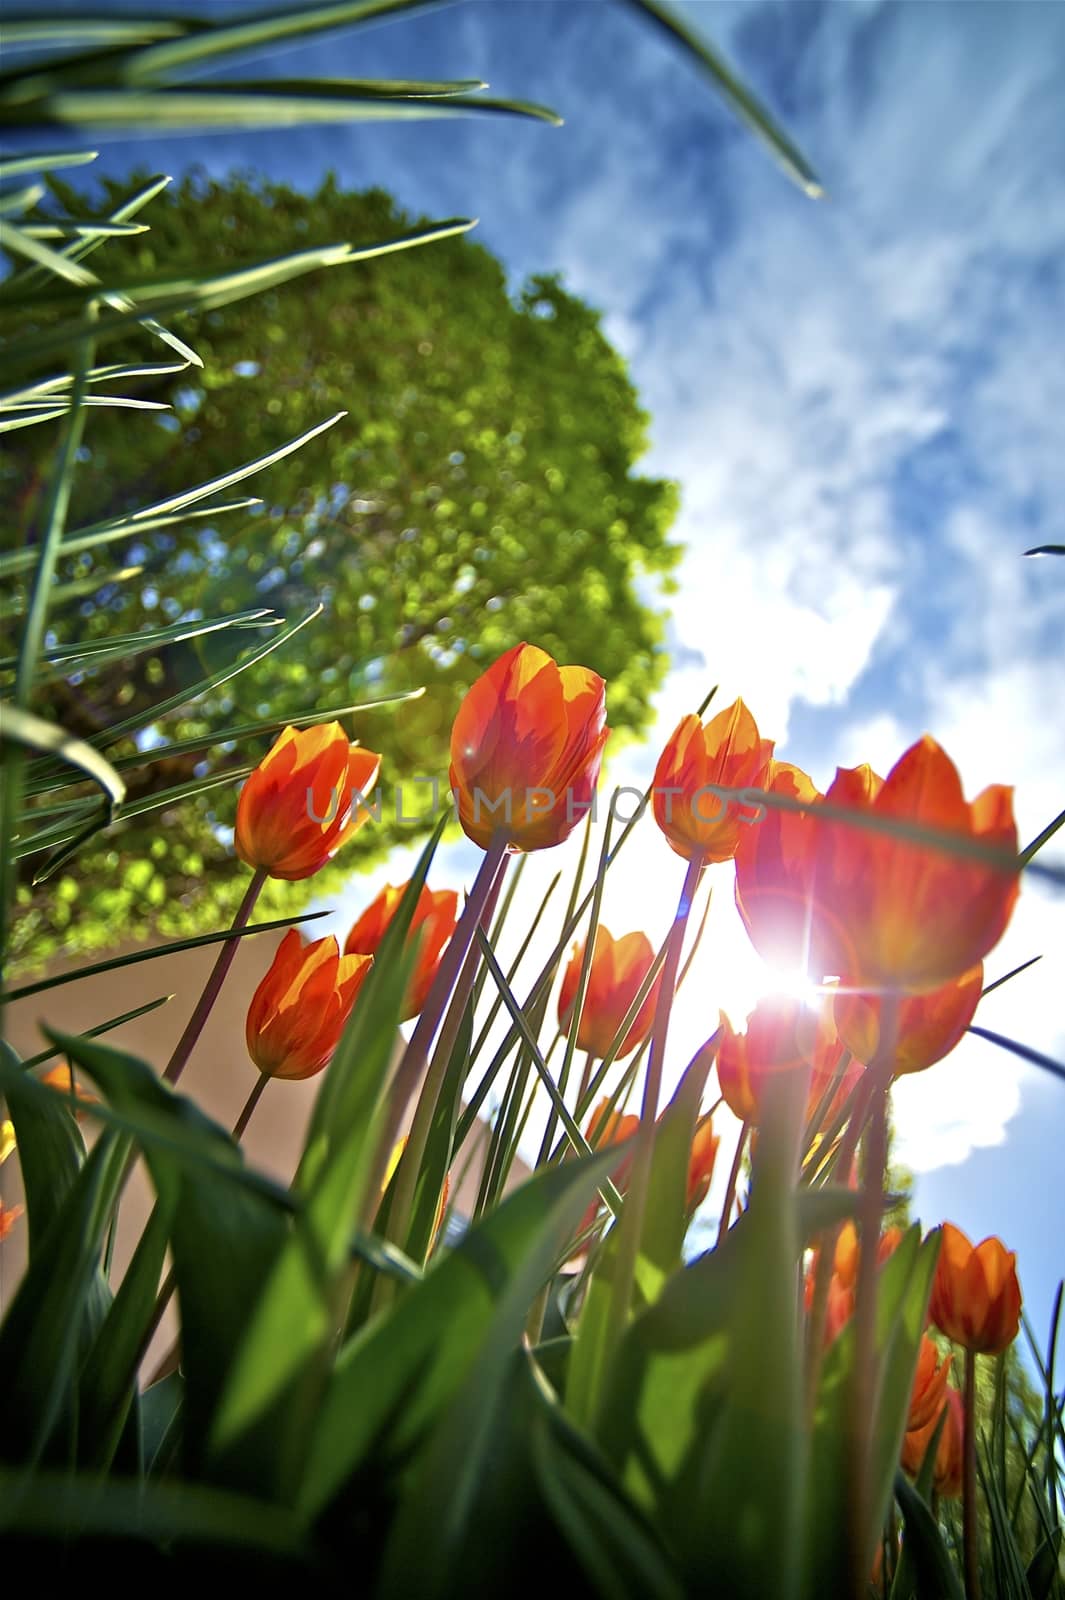 To the Sun - Red Tulips Wide Angle Photo. Summer in the Garden.